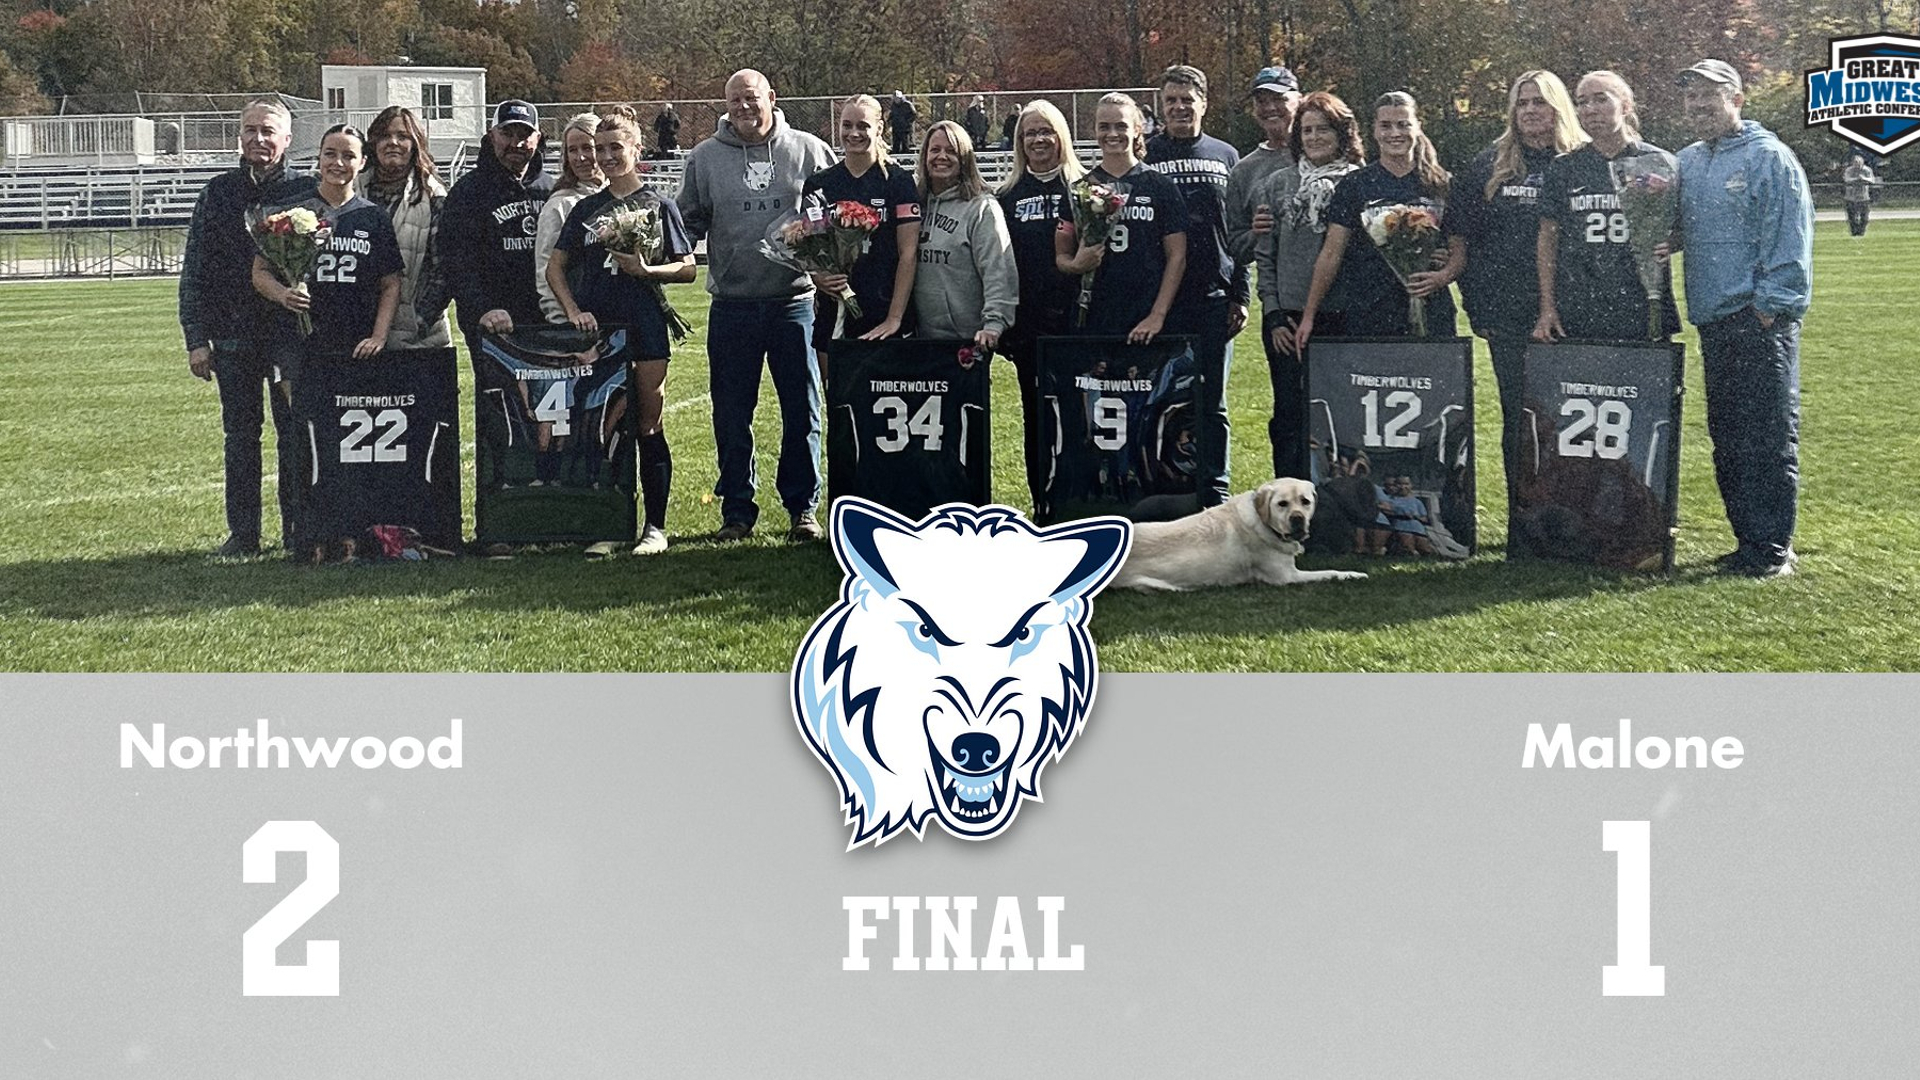 Women's Soccer Gets 11th Win Of The Season With A Senior Day Victory Over Malone, 2-1.